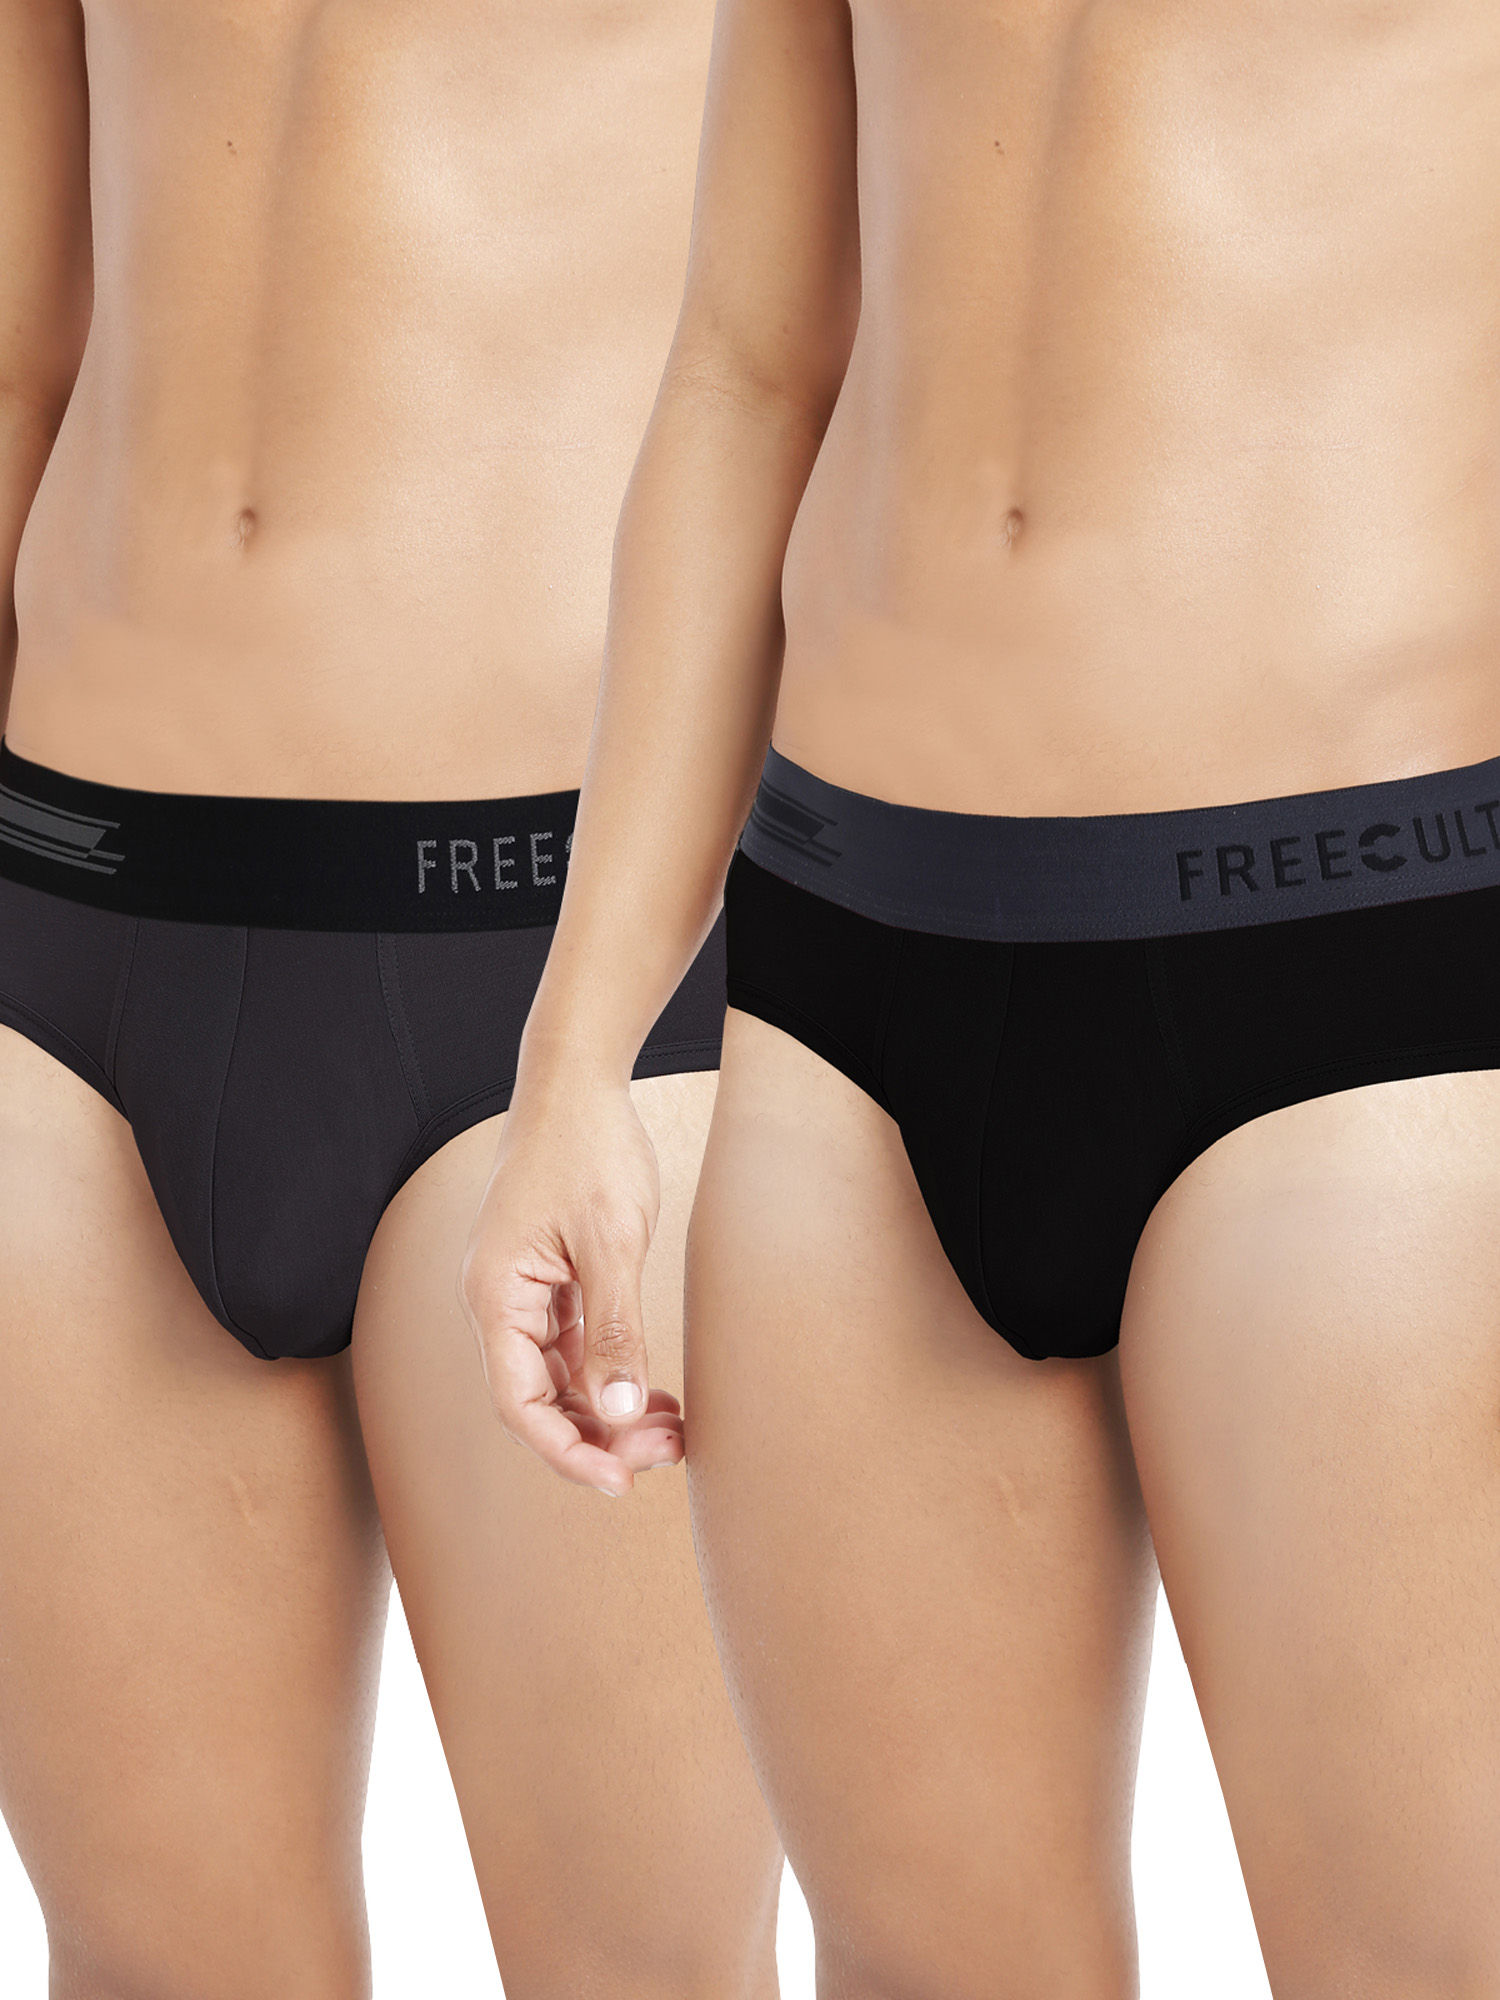 FREECULTR Anti-Microbial Air-Soft Micromodal Underwear Brief Pack Of 2 - Multi-Color (M)